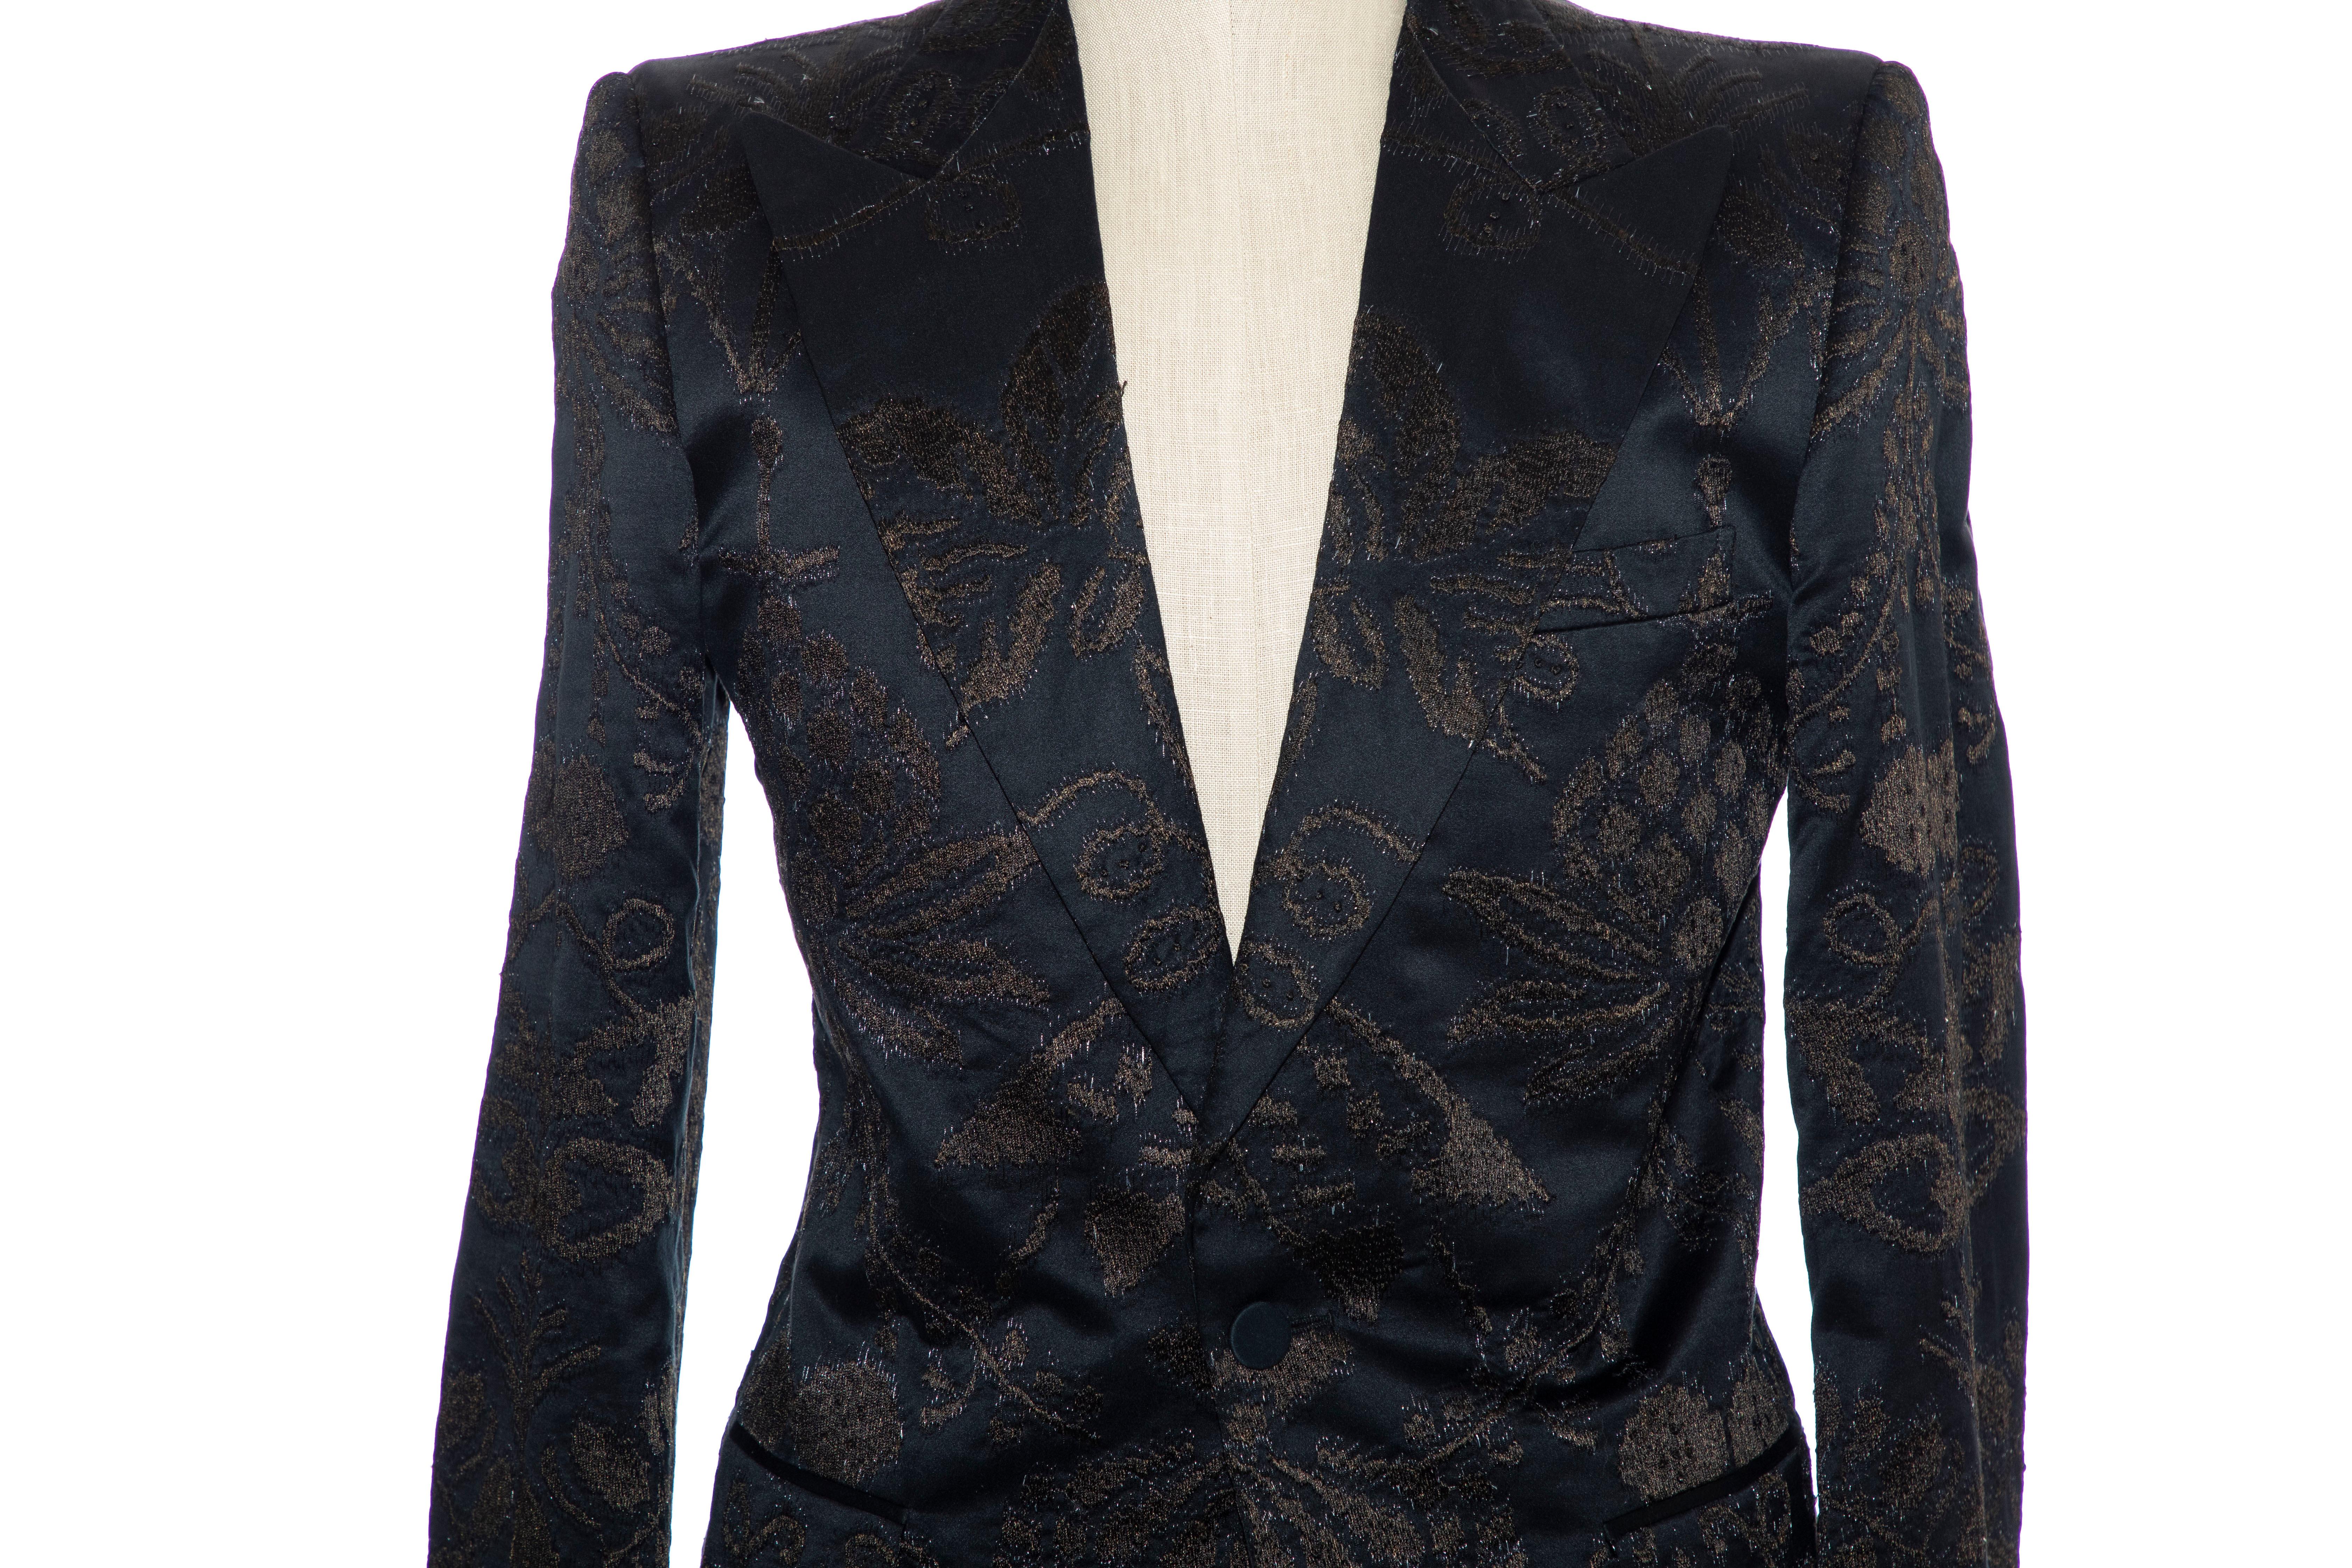 Tom Ford for Gucci black jacquard satin tuxedo blazer with peaked lapels, structured shoulders, three exterior pockets, embroidered jacquard pattern throughout, dual vents at rear, long sleeves, tonal satin lining, four interior pockets and